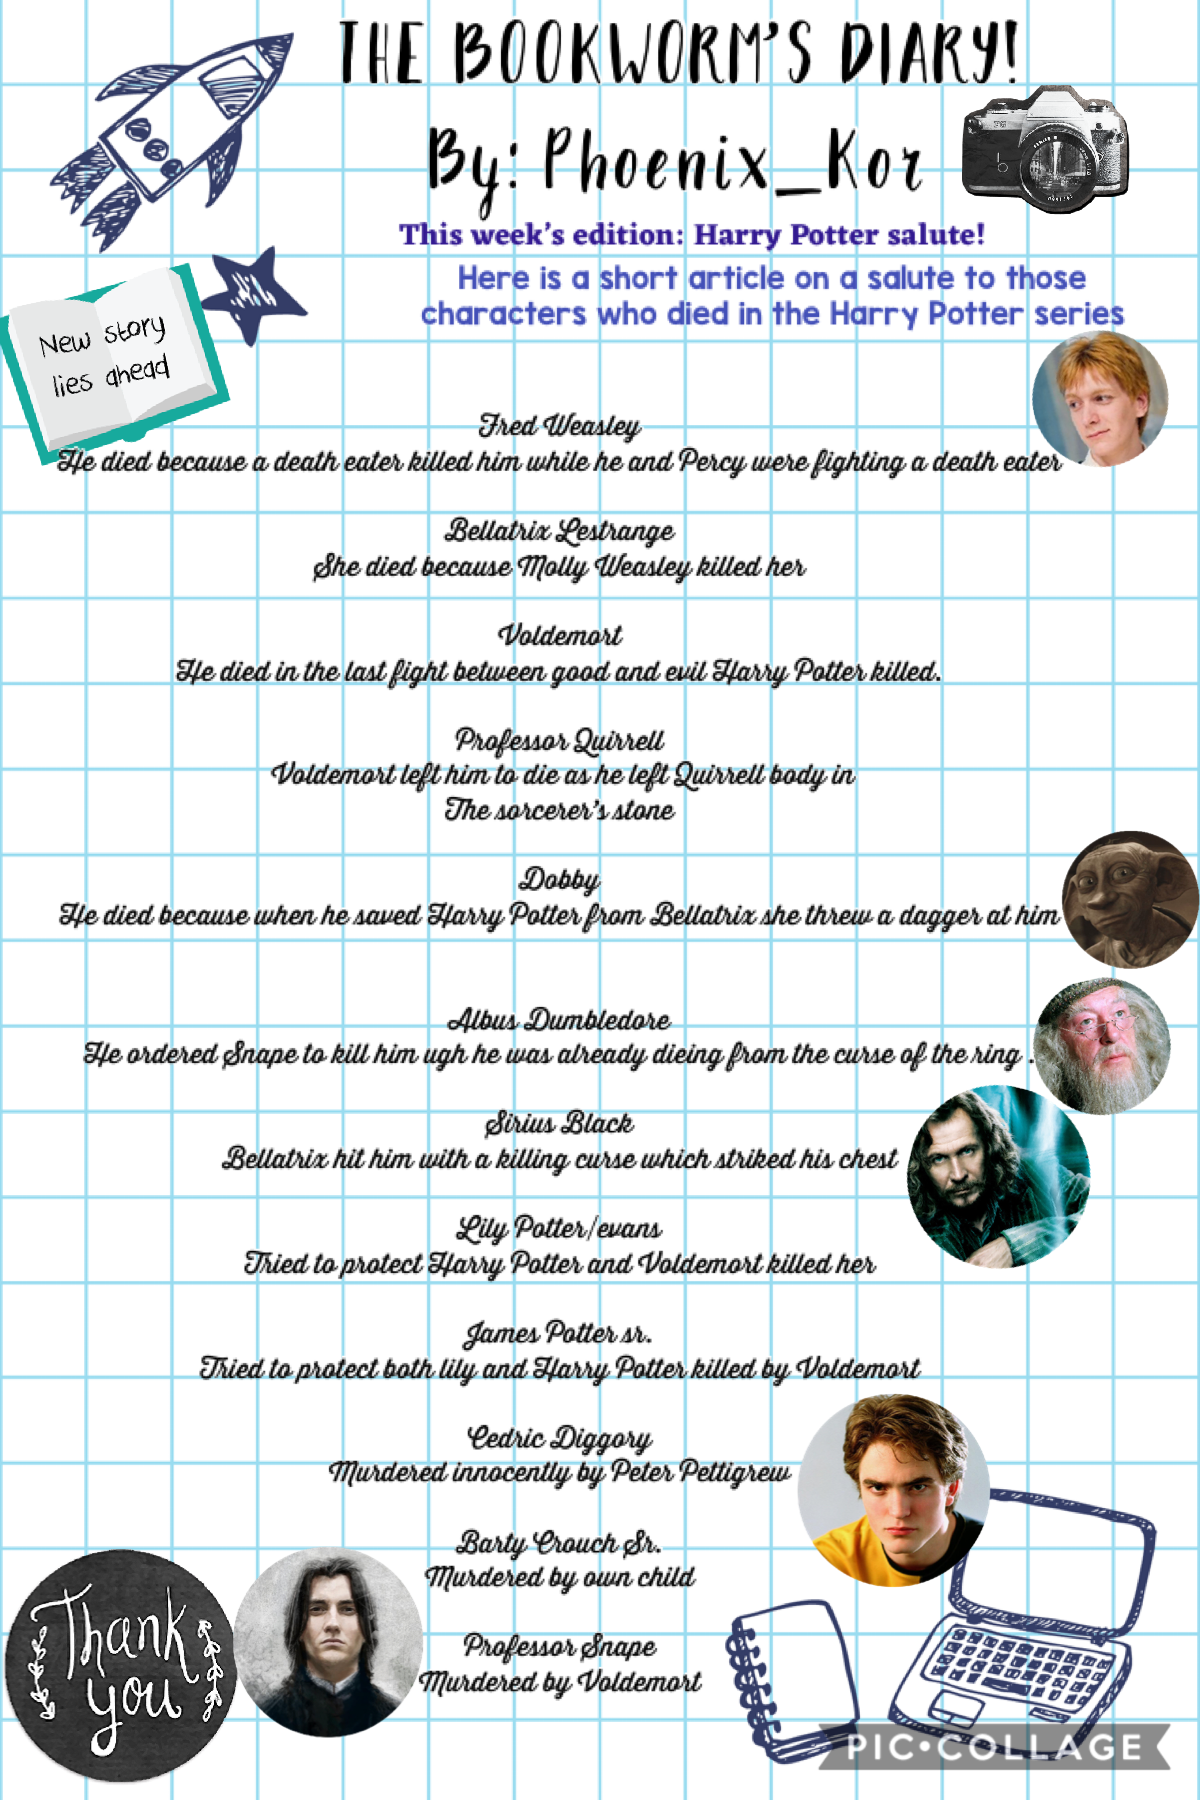 An edition of the bookworm’s diary. Salute to the Harry Potter characters. Except some who were included but were on the bad side.... copyright.